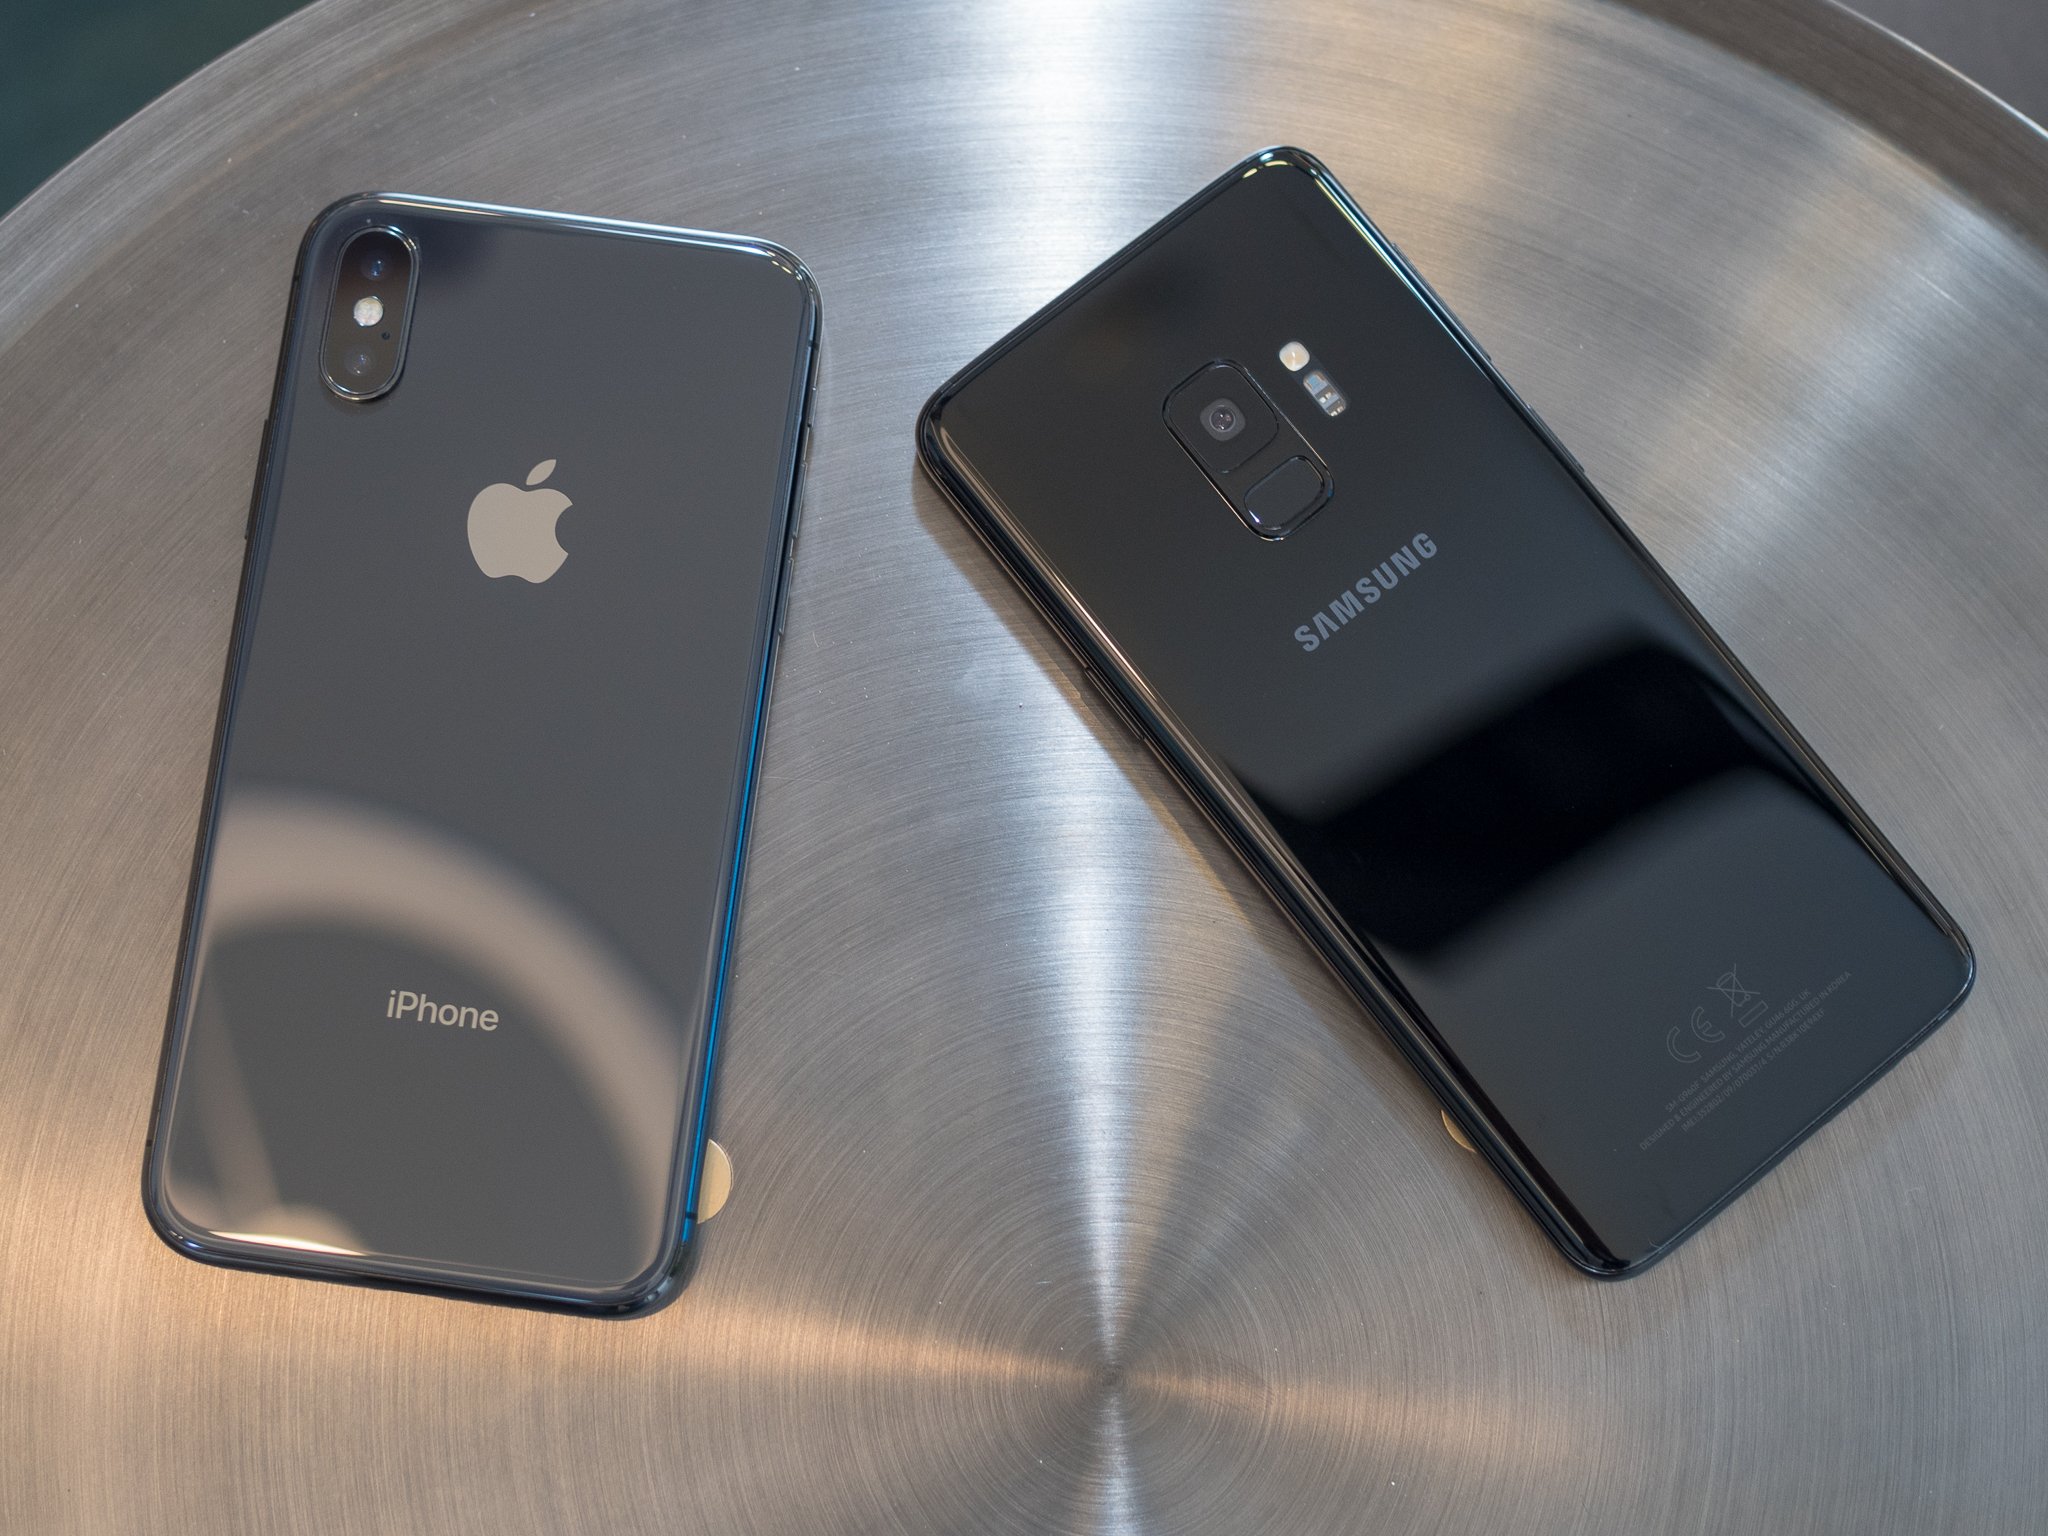 Galaxy S9 and iPhone X